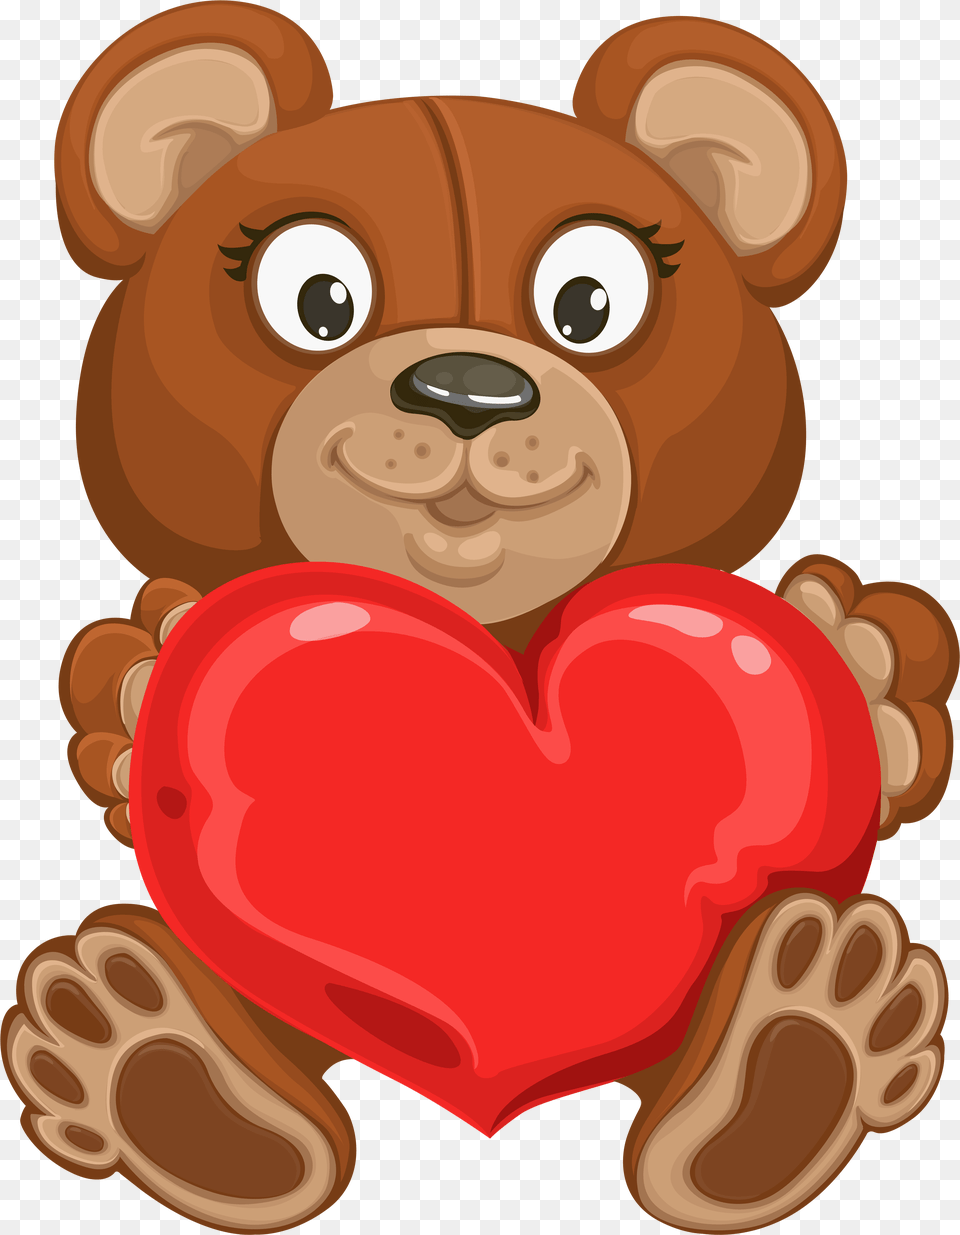 Valentine S Teddy With Heart Clip Art Teddy Bear Heart Free Png Download